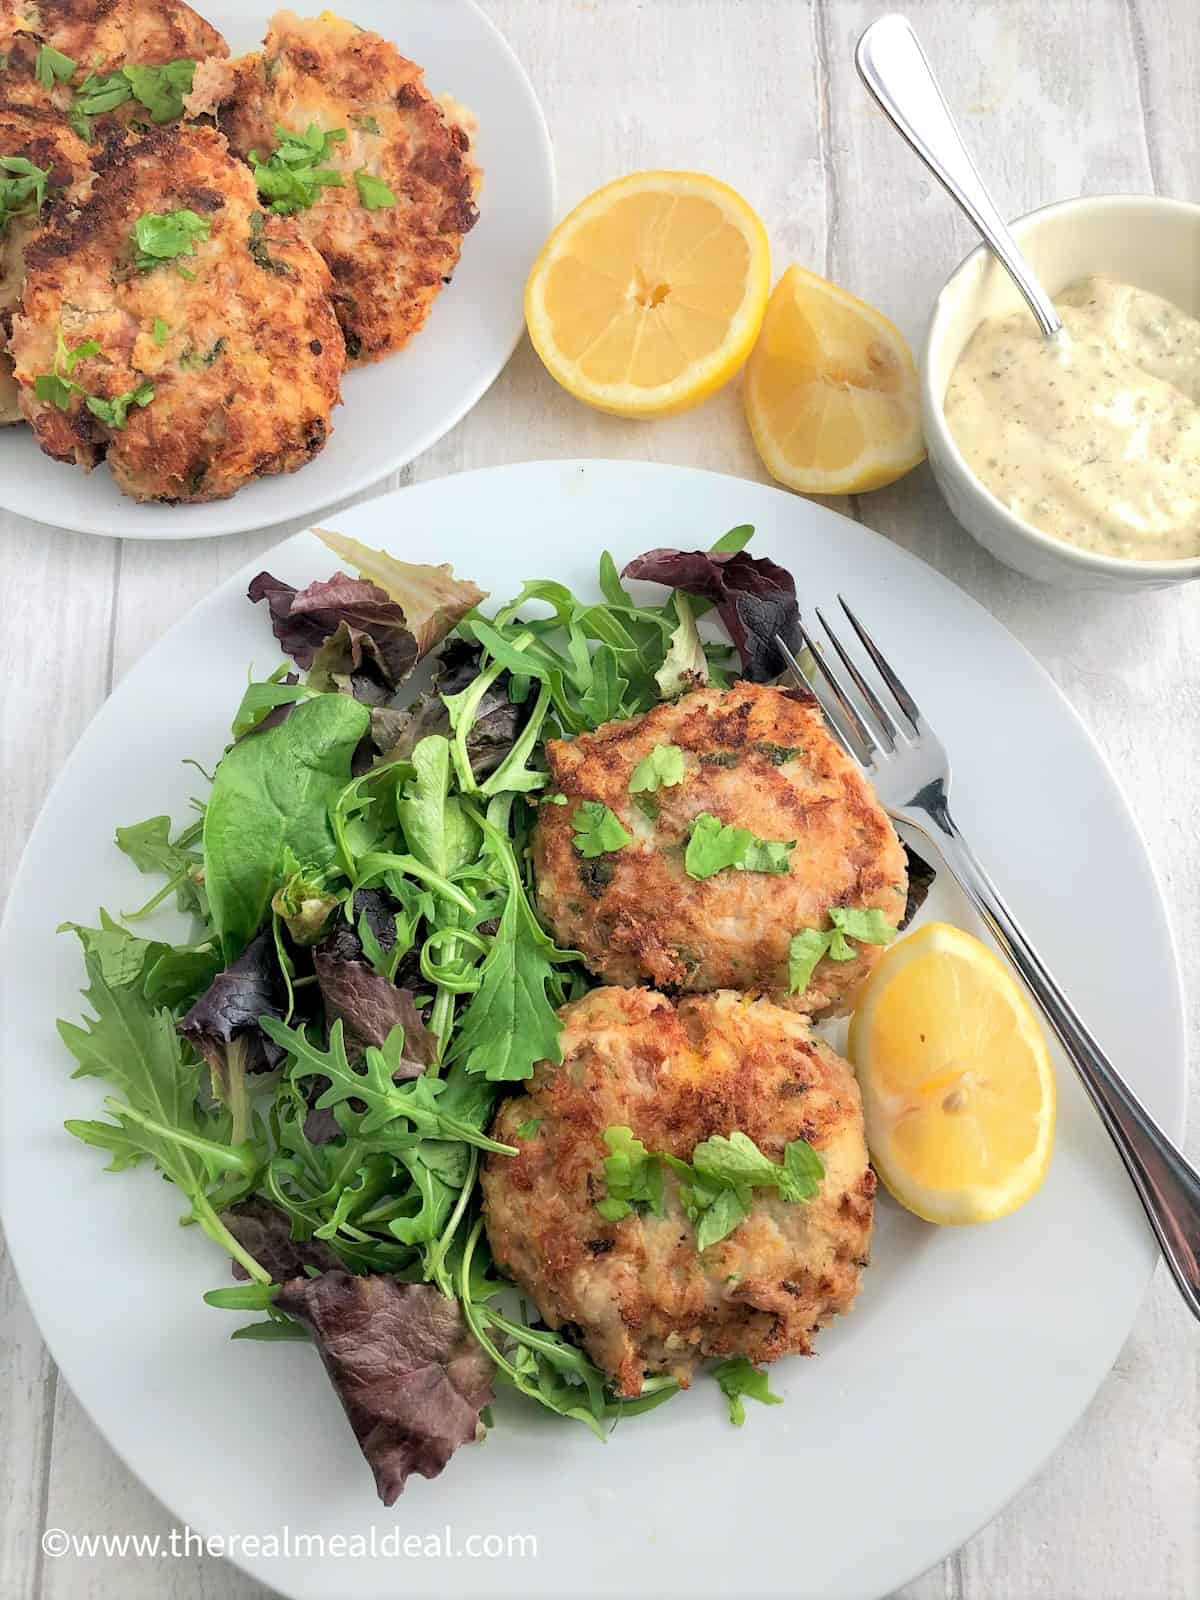 tuna fishcakes on plate with green salad and lemon half plate fishcakes lemon halves tartare sauce in background